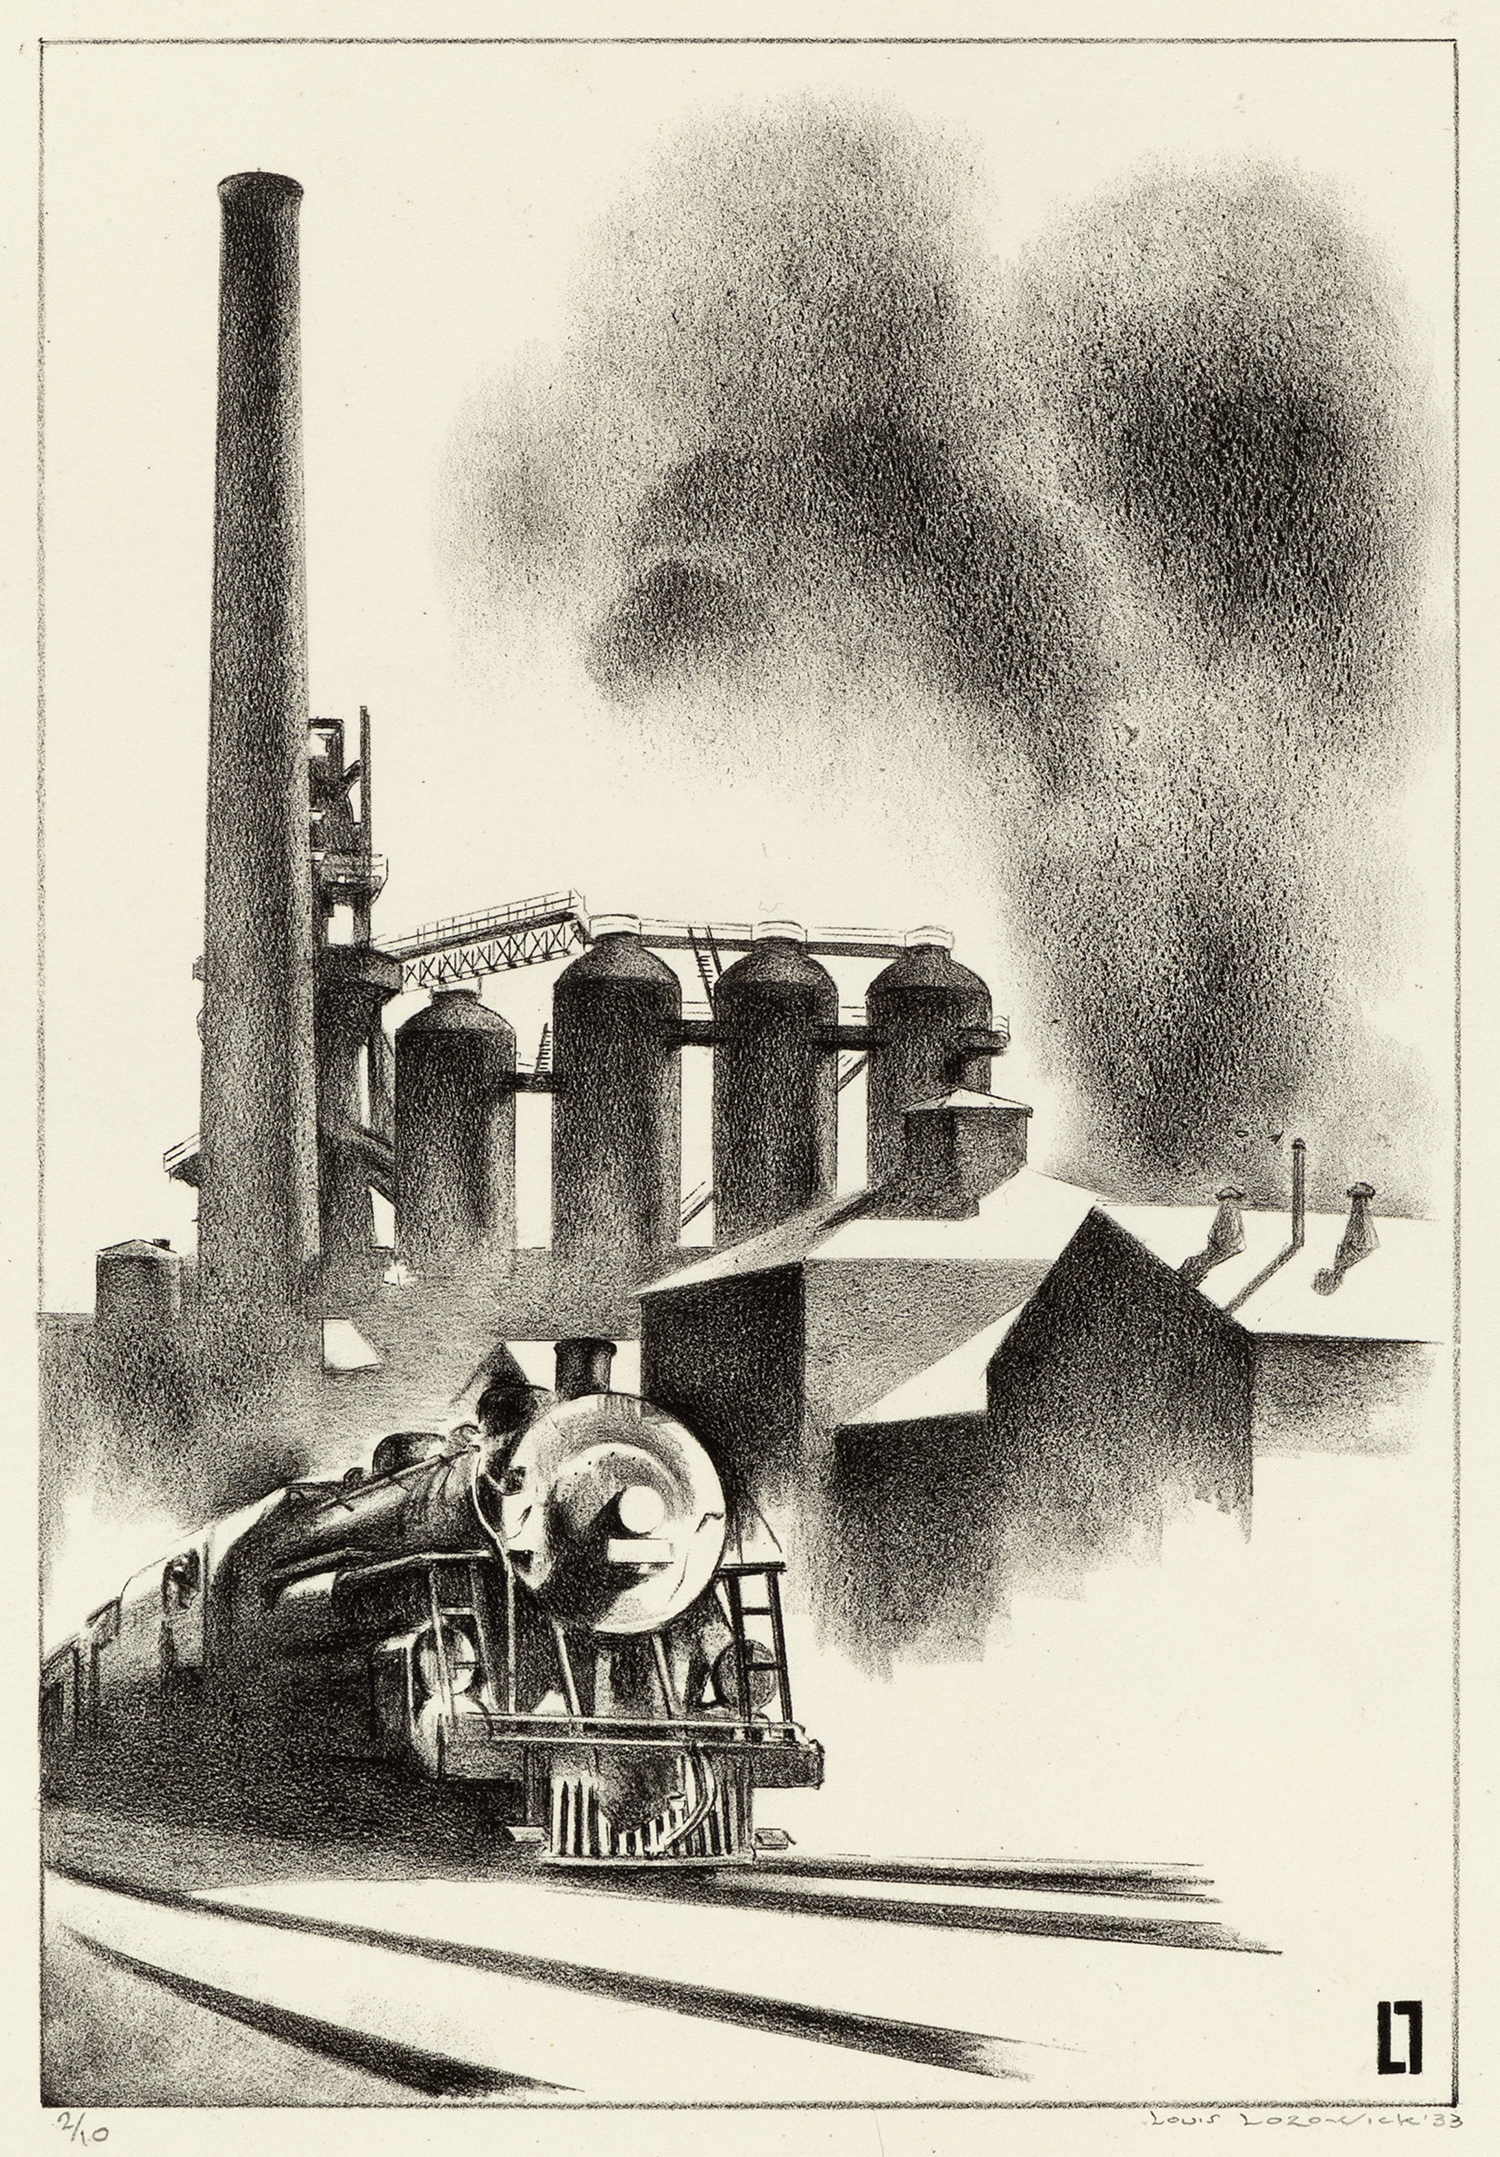 Train and Factory, 1933, Lithograph, 10 5/8 x 7 1/8 inches (27 x 18.1 cm), Edition of 10